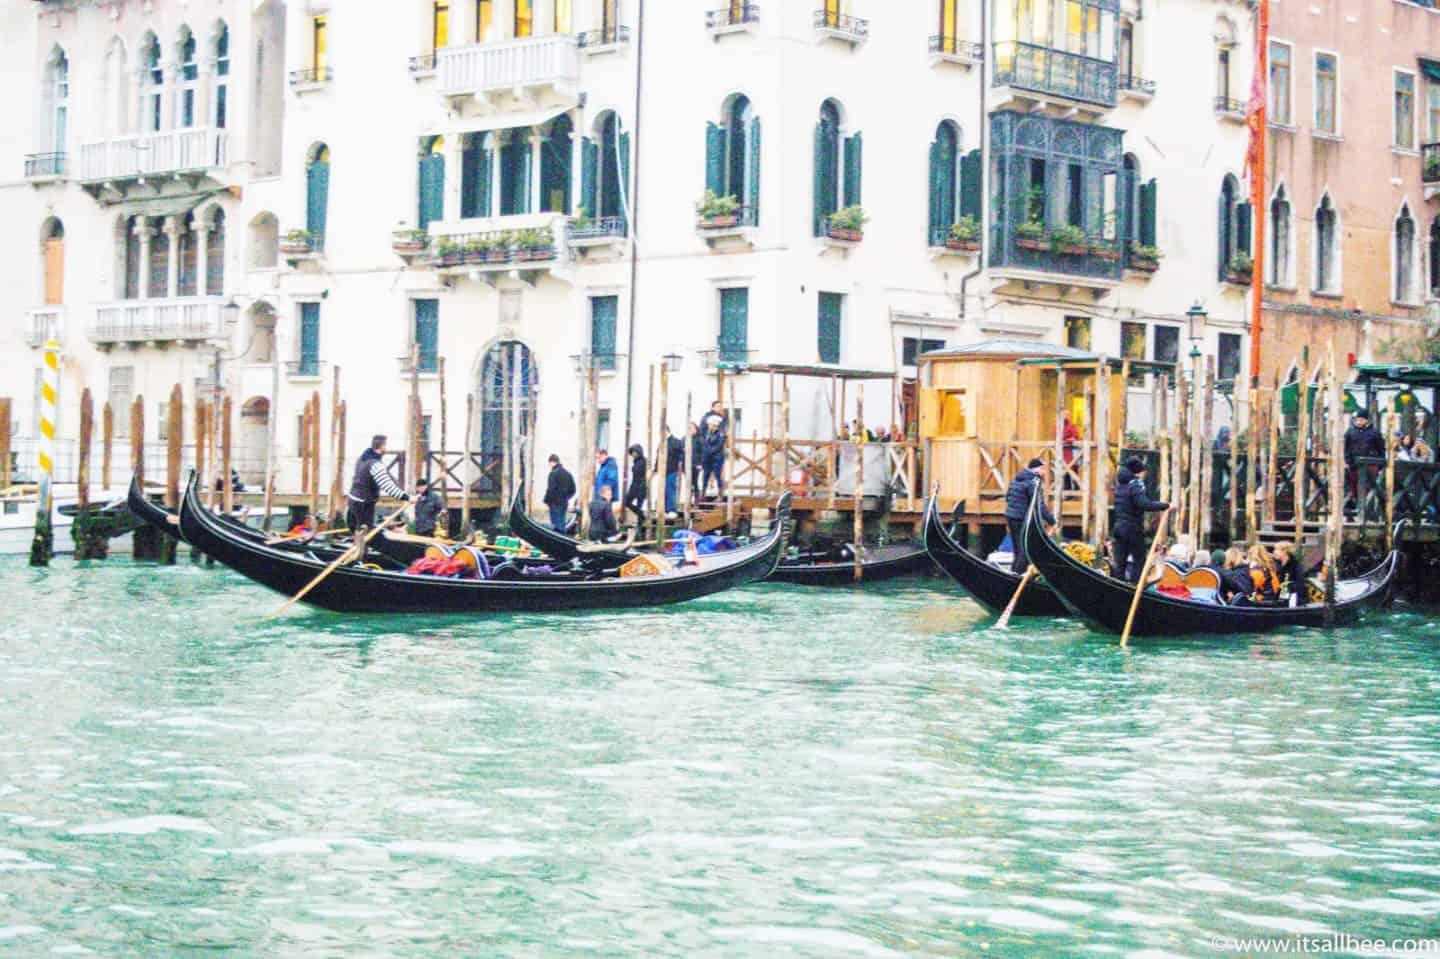  A Day In Venice - The Perfect 1 Day Venice Itinerary